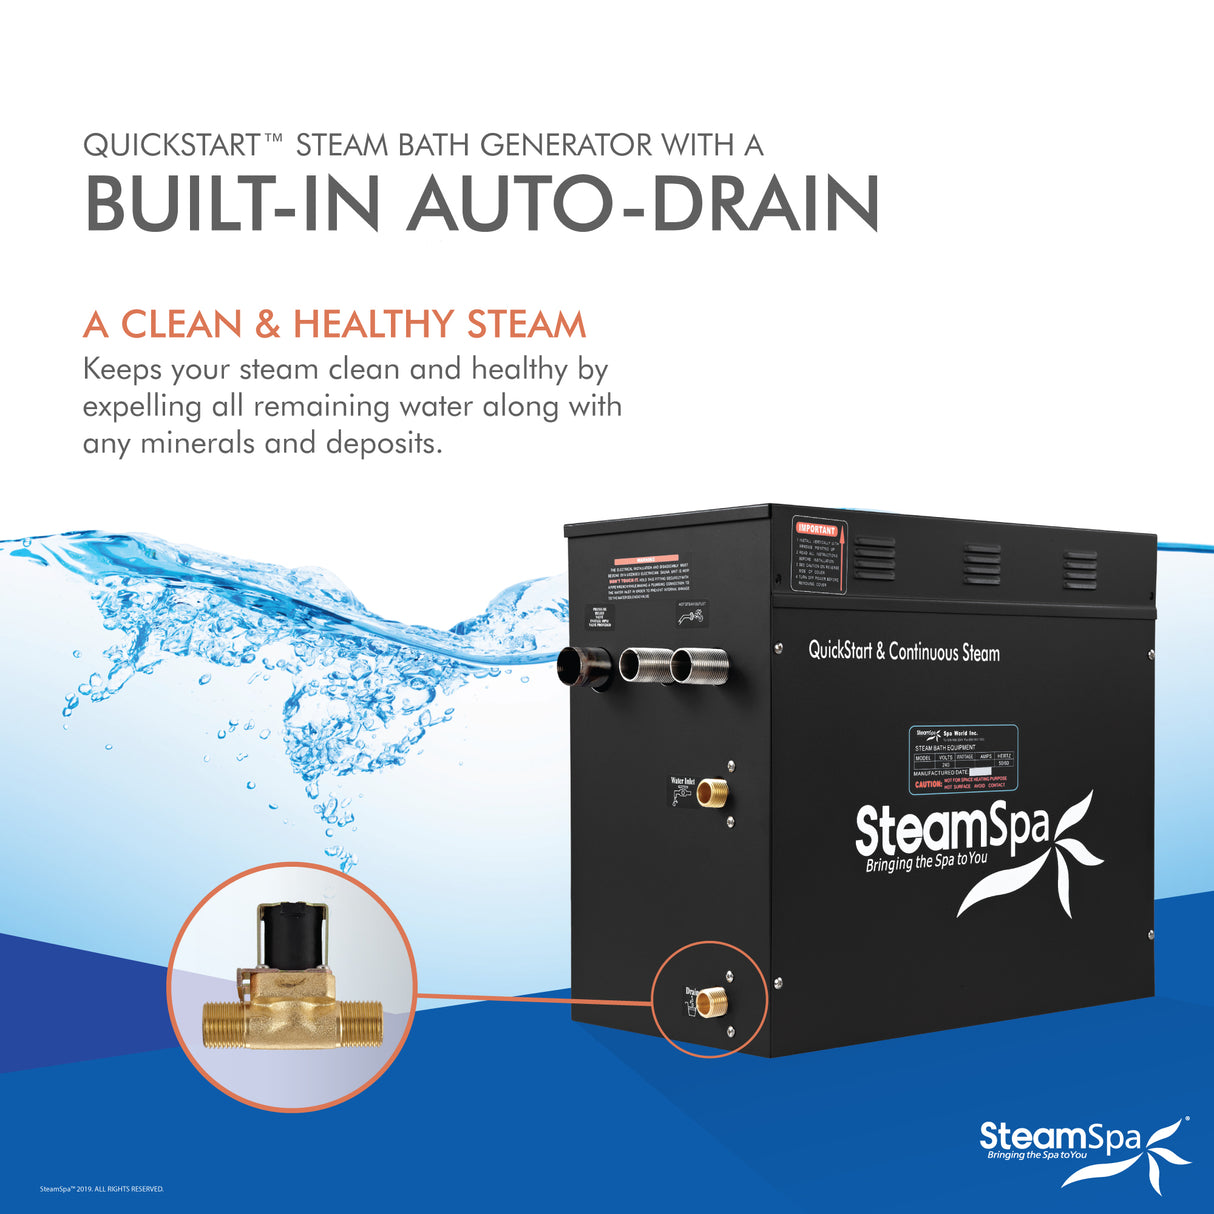 Black Series Wifi and Bluetooth 24kW QuickStart Steam Bath Generator Package in Polished Chrome BKT2400CH-A